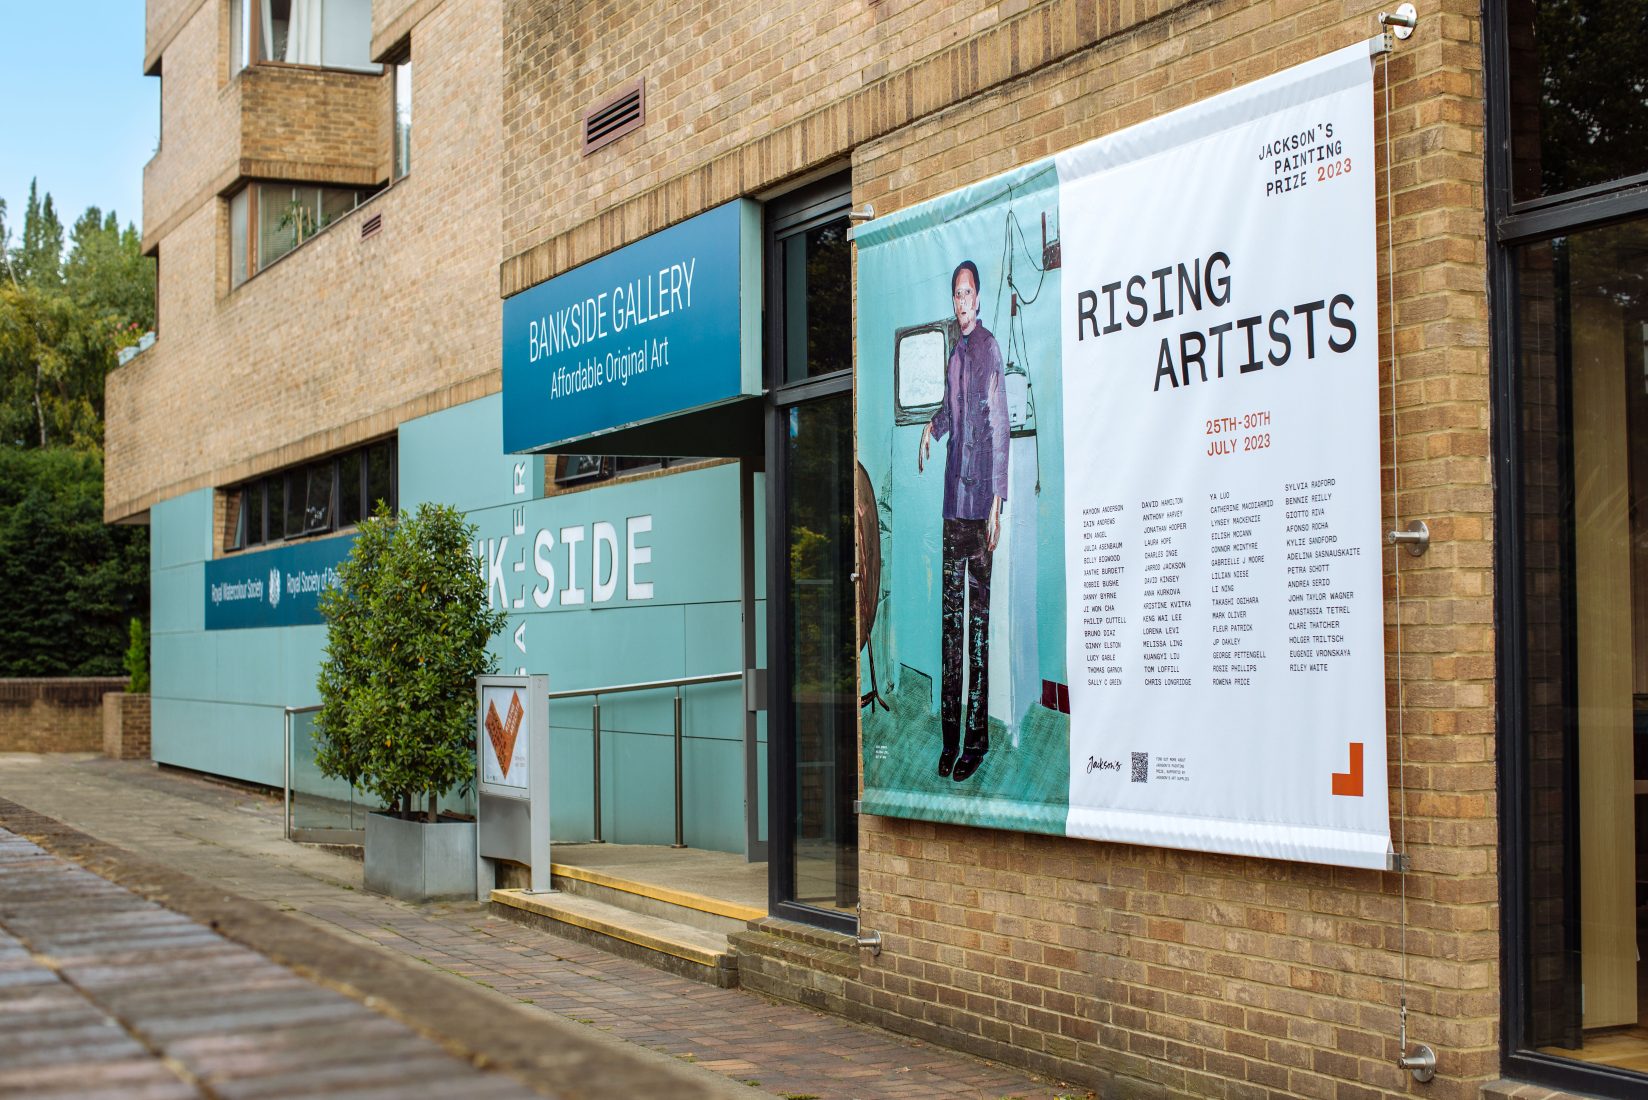 Jackson’s Painting Prize 2023 Exhibition At Bankside Gallery